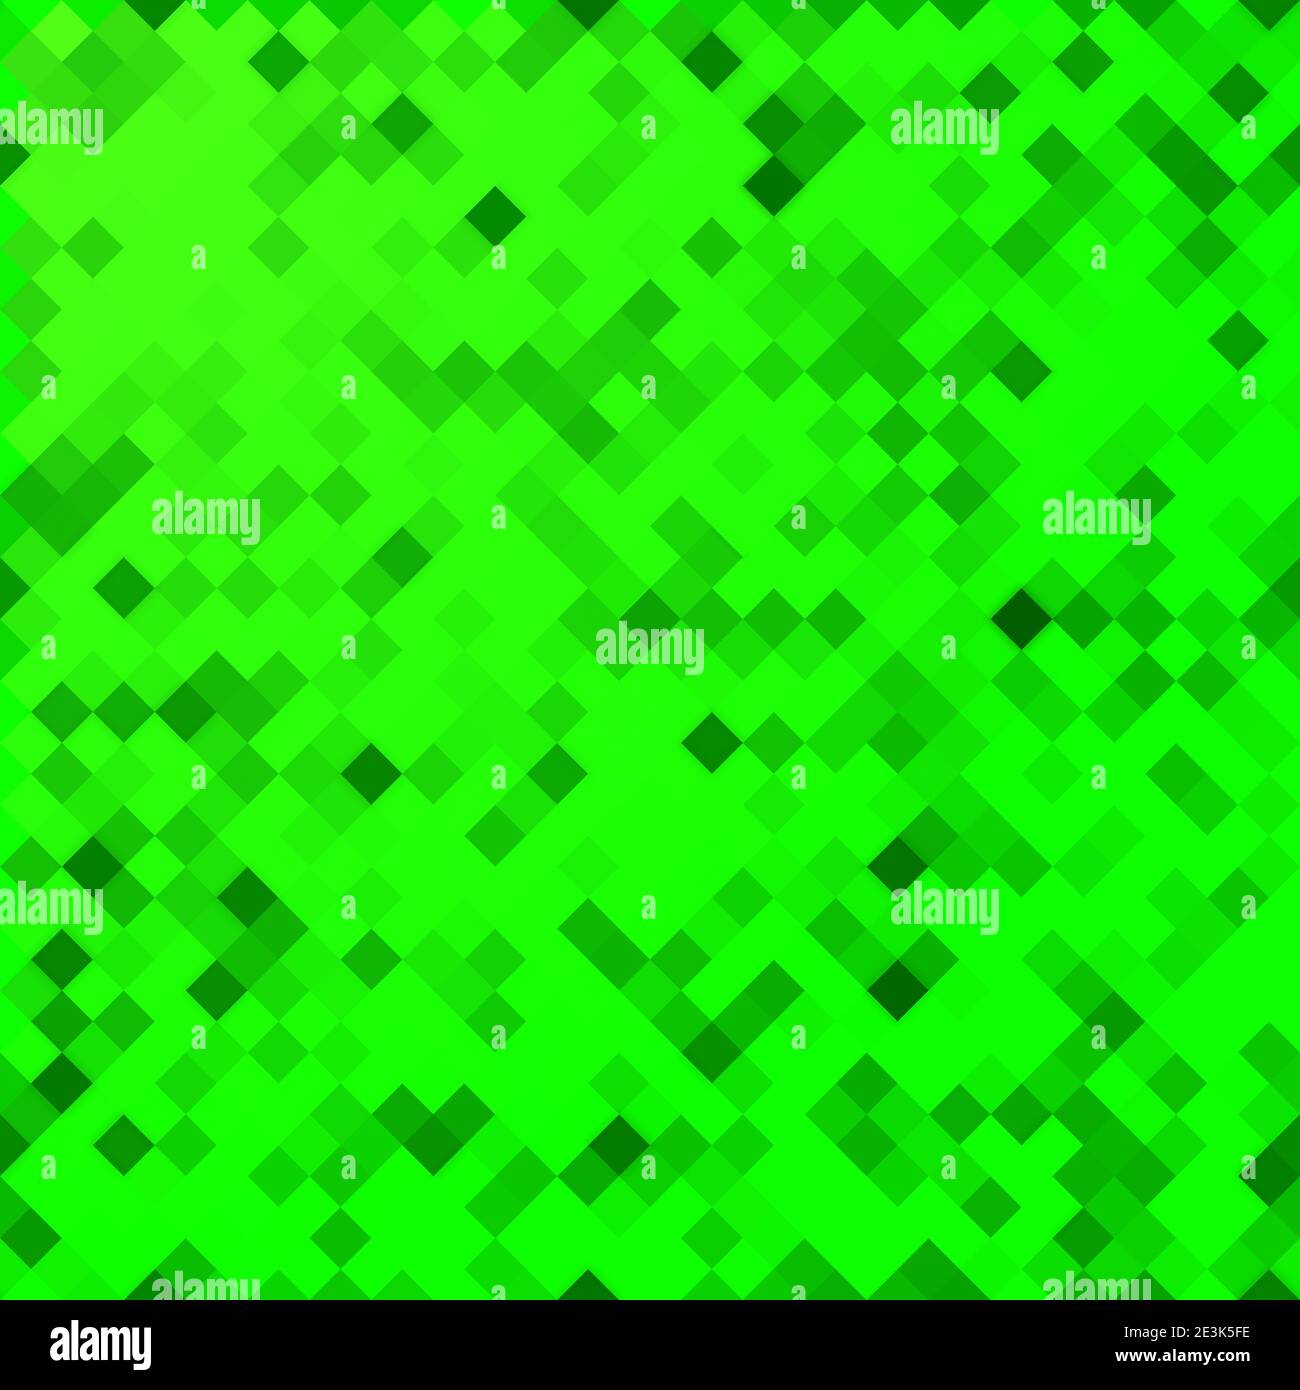 abstract seamless mosaic green background. Can be used as gift wrapping paper Stock Photo